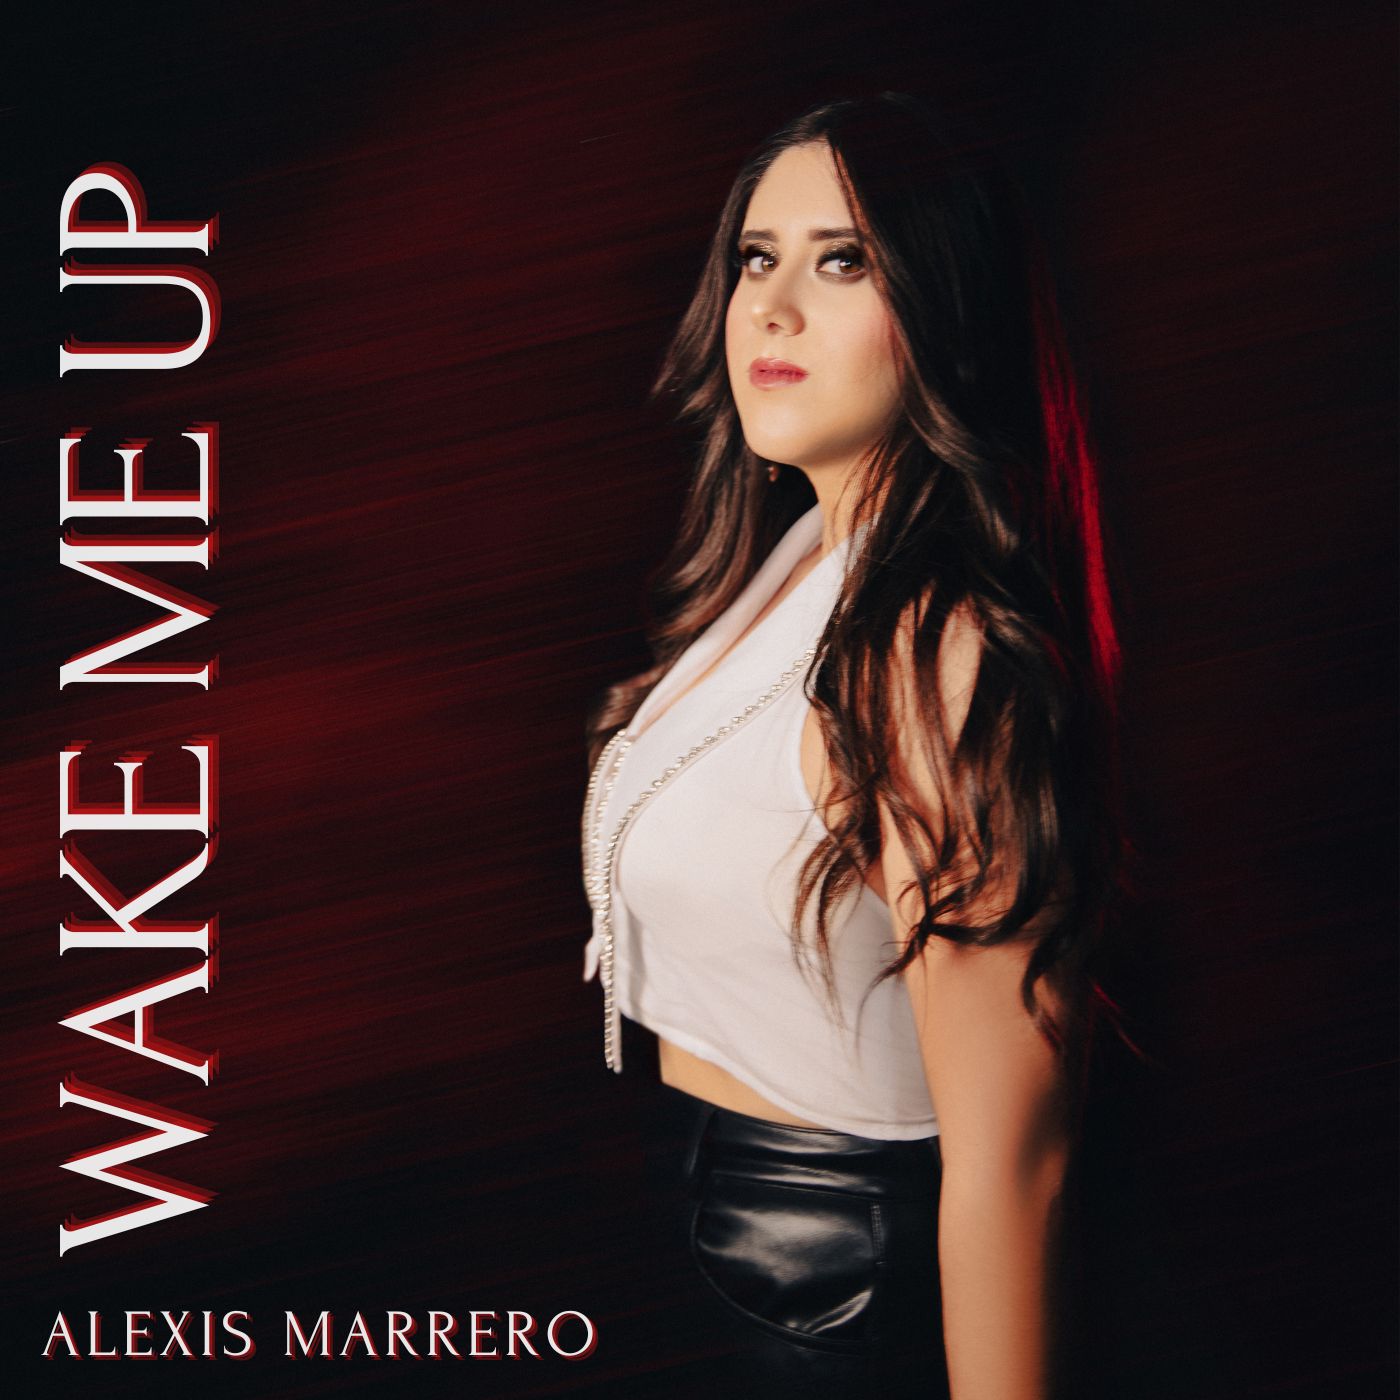 Alexis Marrero To Release Highly Anticipated New Single “Wake Me Up” On Friday, March 10th, 2023 21